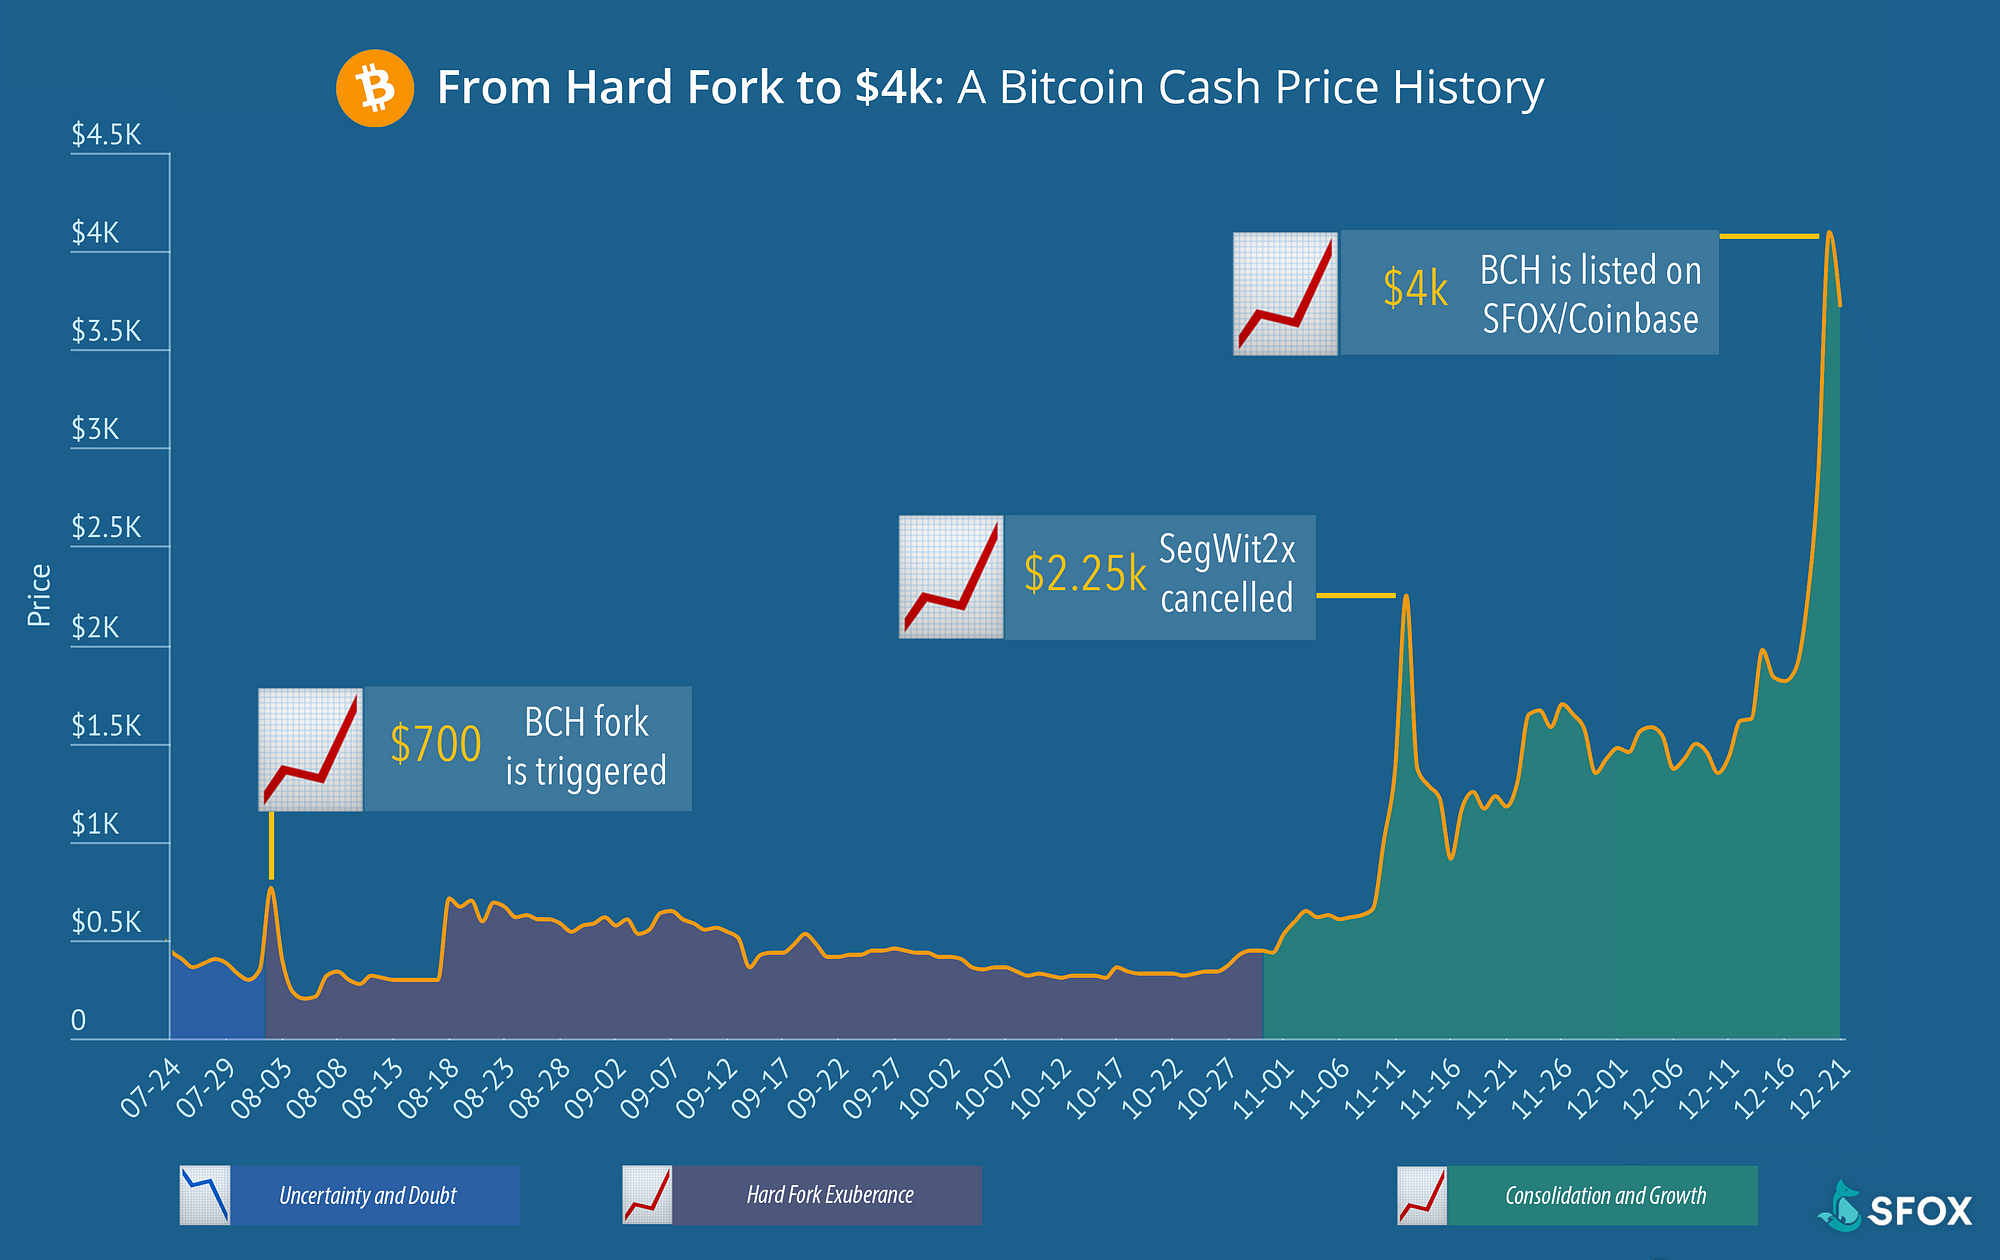 From Hard Fork to $4K: A Bitcoin Cash Price History